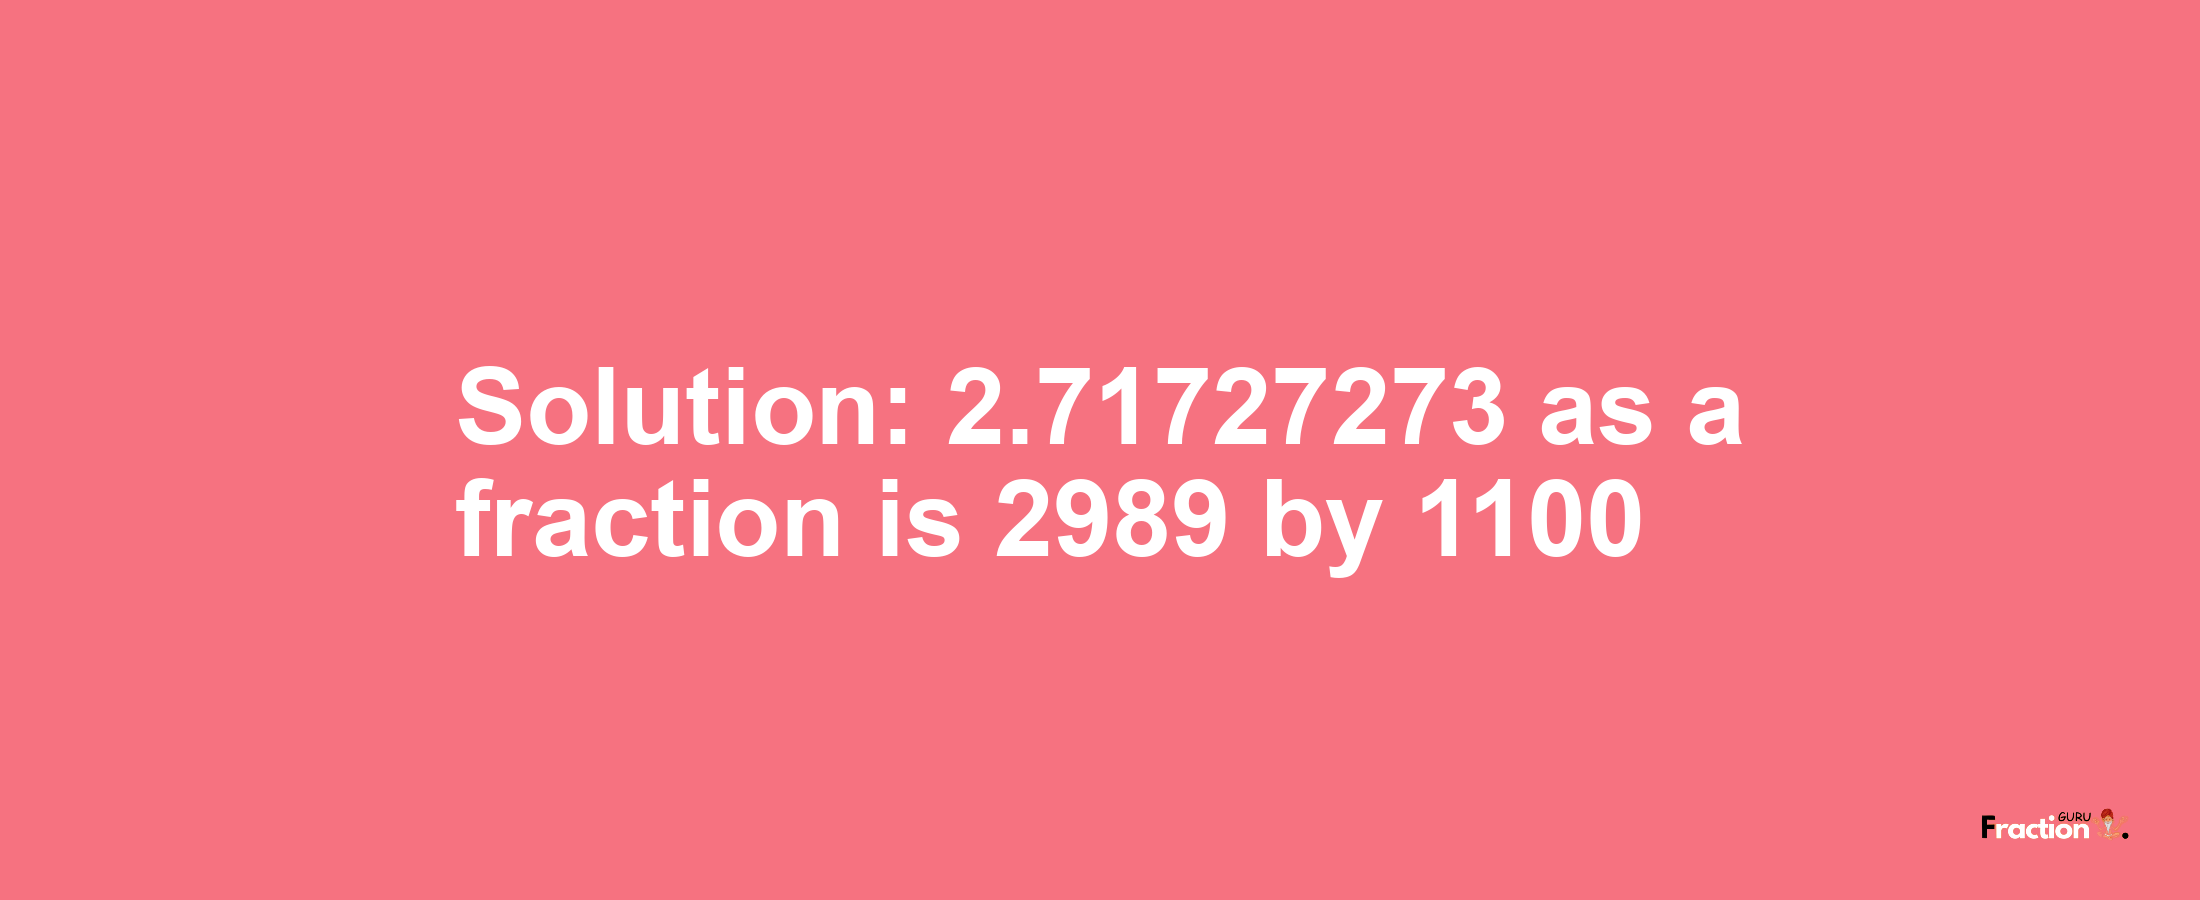 Solution:2.71727273 as a fraction is 2989/1100